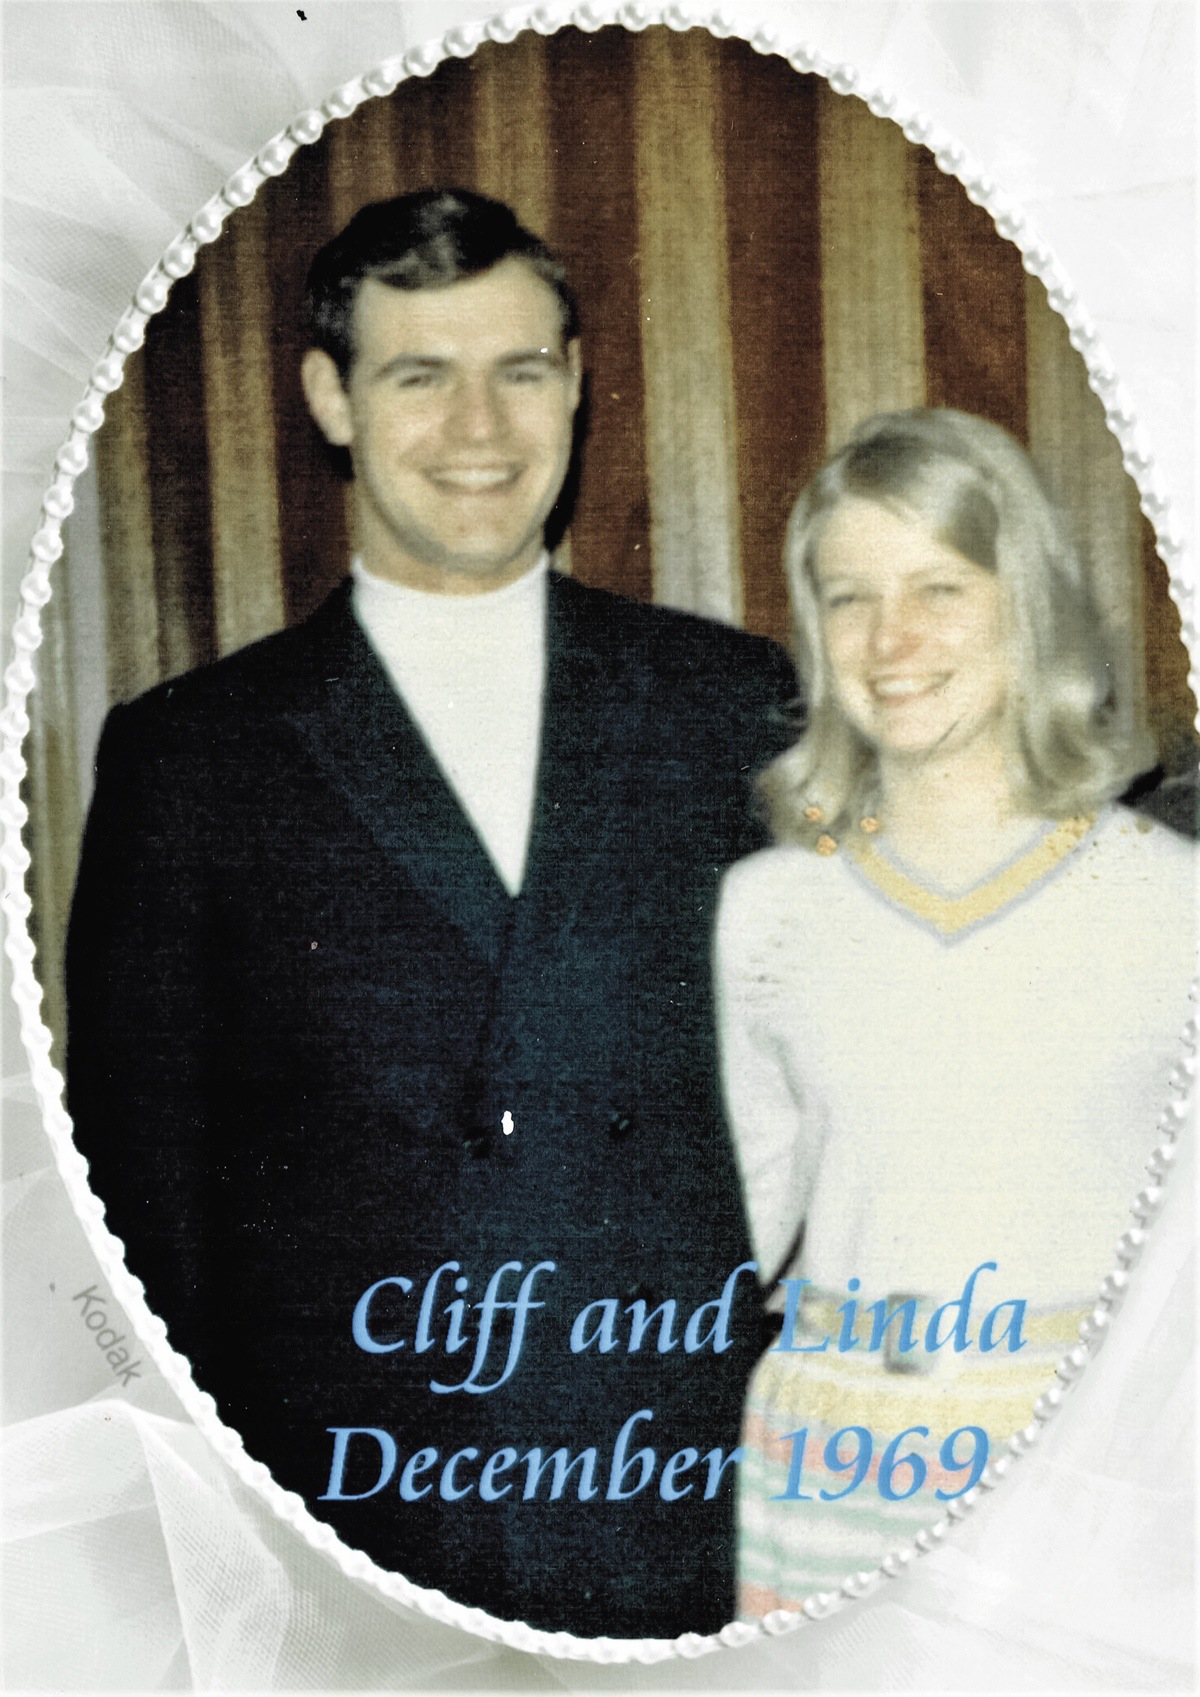 Cliff and Linda Dungey in 1969 as high school sweethearts. (Photo provided)